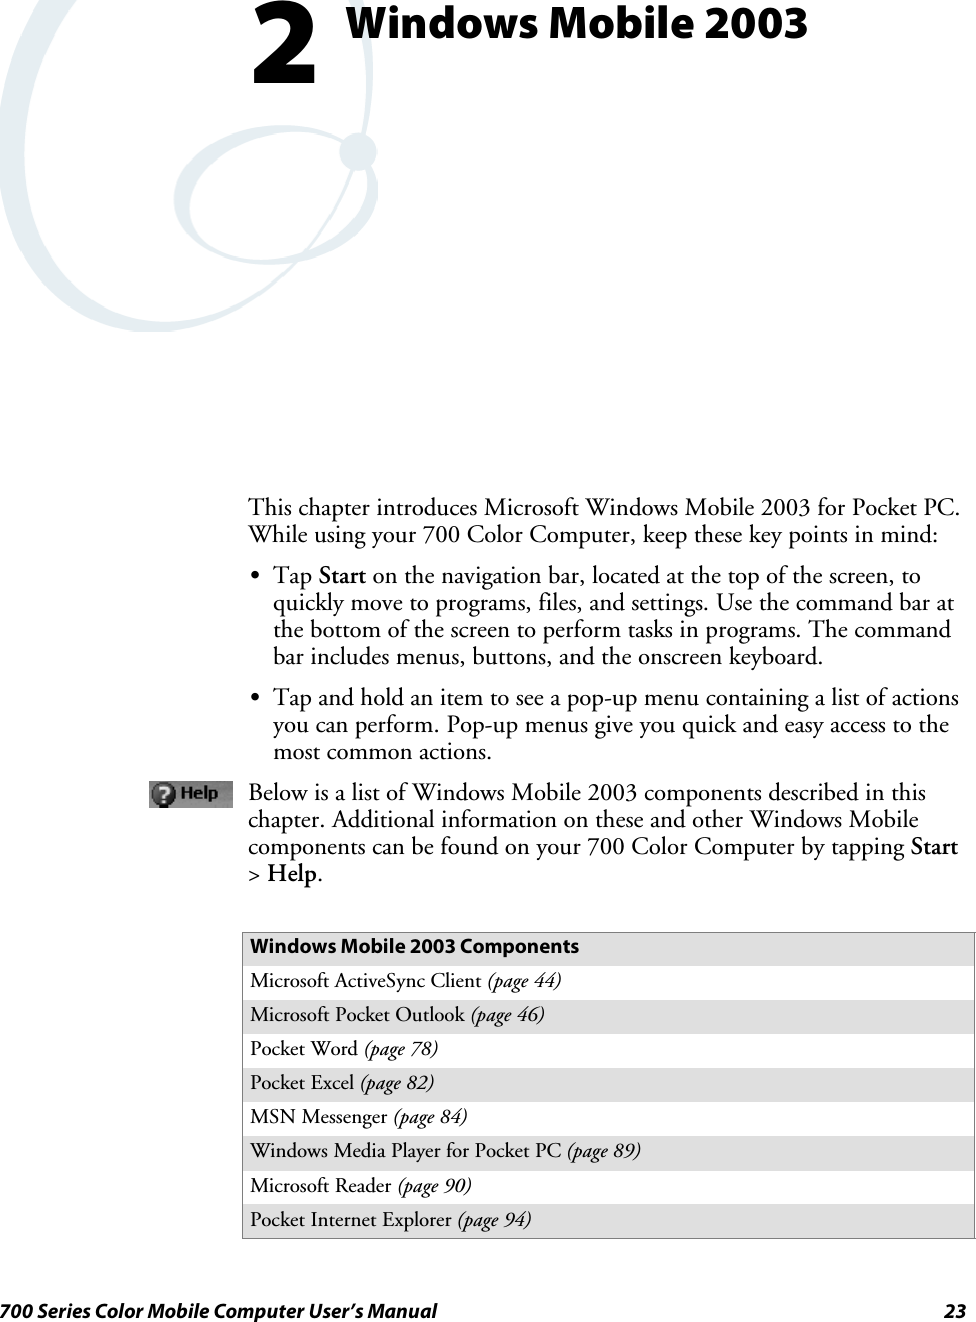 23700 Series Color Mobile Computer User’s ManualWindows Mobile 20032This chapter introduces Microsoft Windows Mobile 2003 for Pocket PC.While using your 700 Color Computer, keep these key points in mind:STap Start on the navigation bar, located at the top of the screen, toquickly move to programs, files, and settings. Use the command bar atthe bottom of the screen to perform tasks in programs. The commandbar includes menus, buttons, and the onscreen keyboard.STap and hold an item to see a pop-up menu containing a list of actionsyou can perform. Pop-up menus give you quick and easy access to themost common actions.Below is a list of Windows Mobile 2003 components described in thischapter. Additional information on these and other Windows Mobilecomponents can be found on your 700 Color Computer by tapping Start&gt;Help.Windows Mobile 2003 ComponentsMicrosoft ActiveSync Client (page 44)Microsoft Pocket Outlook (page 46)Pocket Word (page 78)Pocket Excel (page 82)MSN Messenger (page 84)Windows Media Player for Pocket PC (page 89)Microsoft Reader (page 90)Pocket Internet Explorer (page 94)